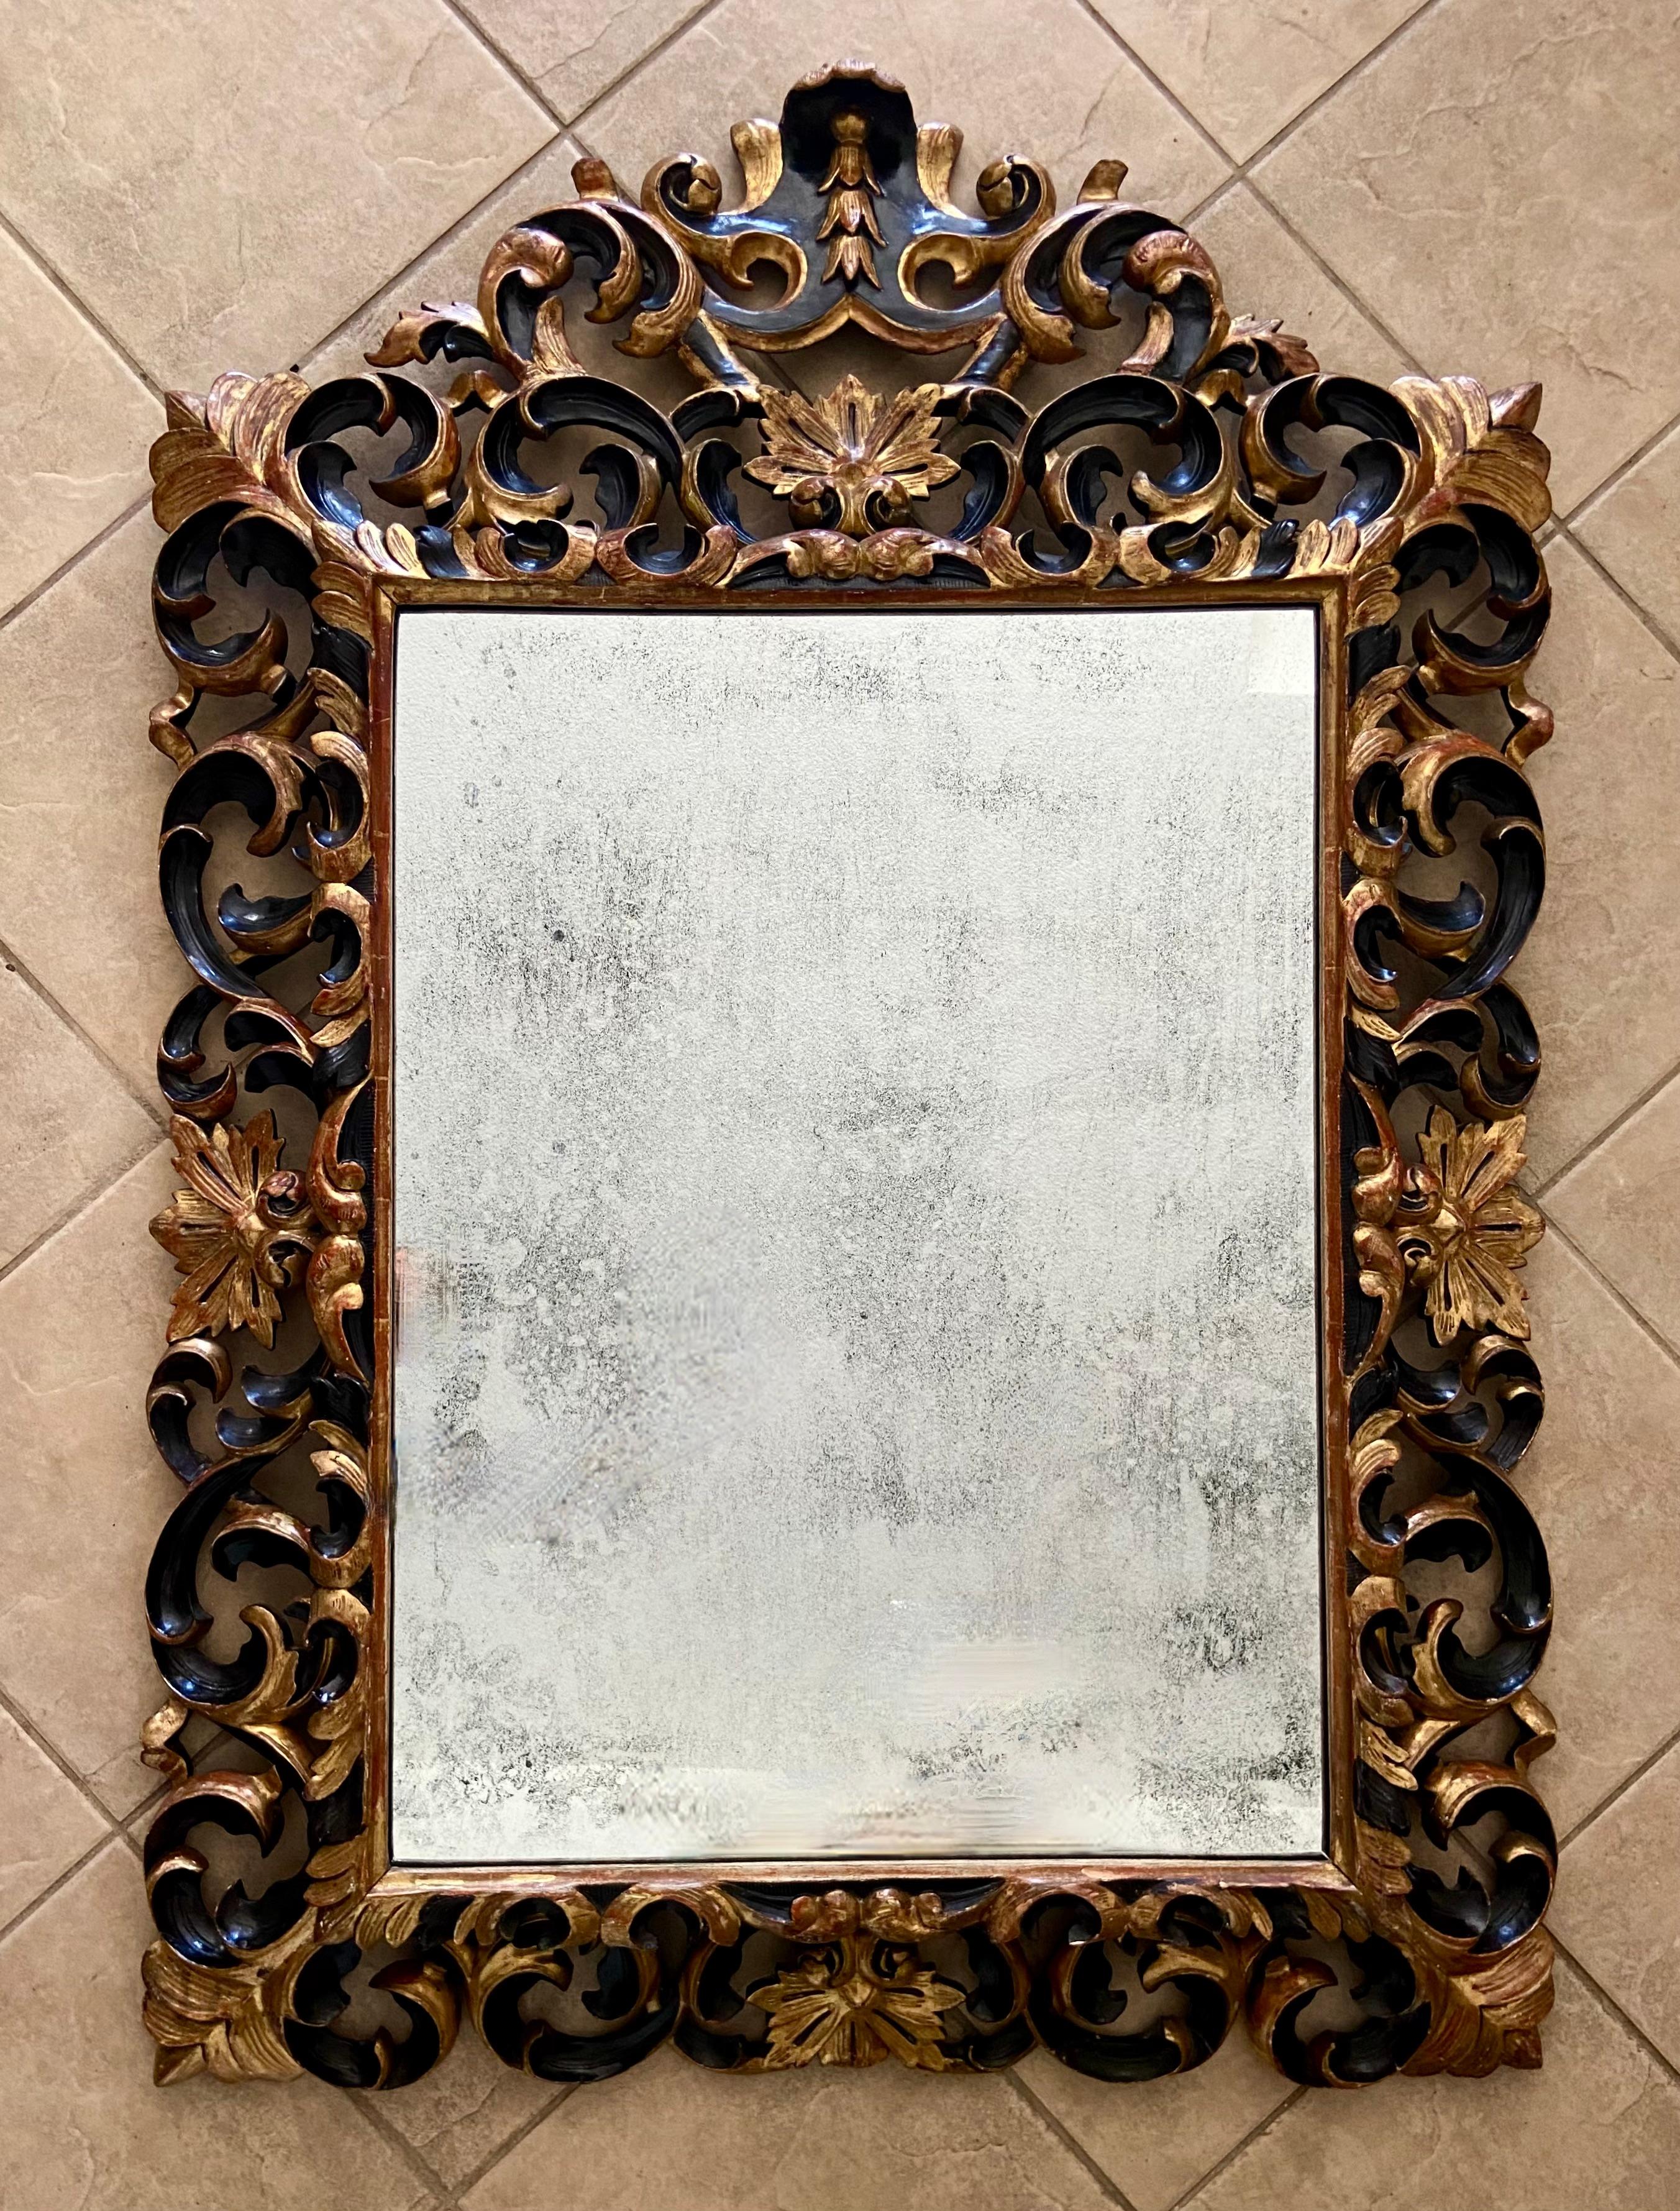 Large Italian Rococo 19th century 23K giltwood wall mirror with ornately carved filigree frame. The gold leafing has black highlights (most likely added at some later date). Large center mirror has a nice aged oxidation to silver finish. Impressive